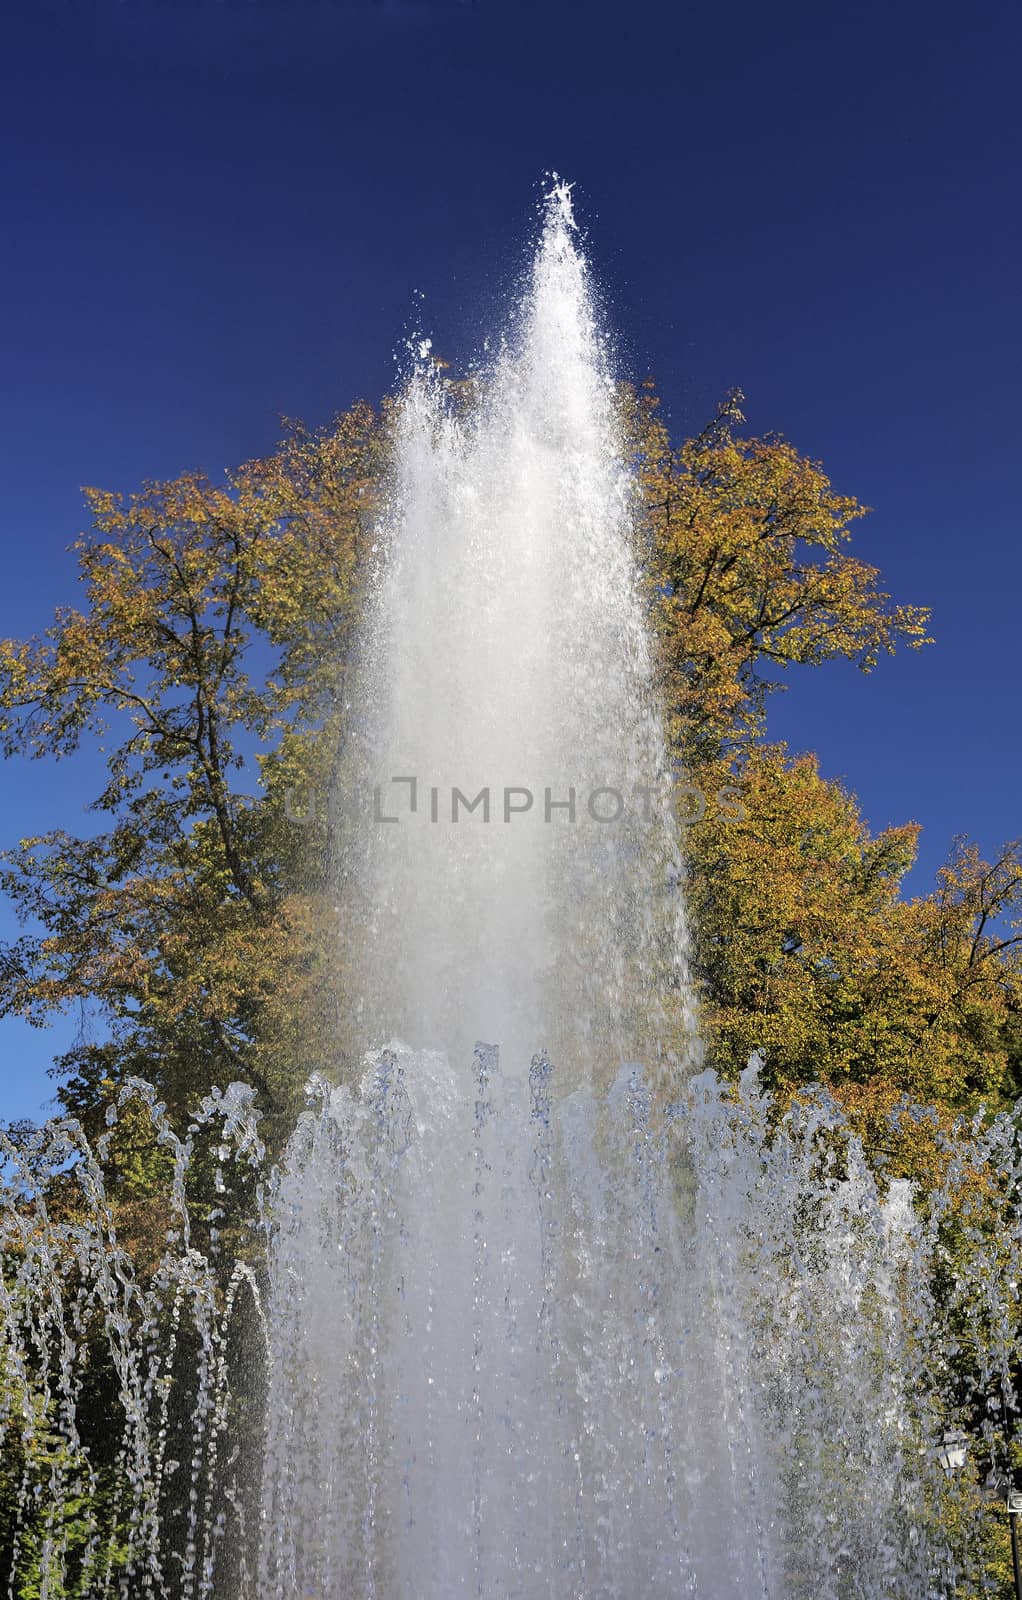 Splashes of fountain water in a sunny day

